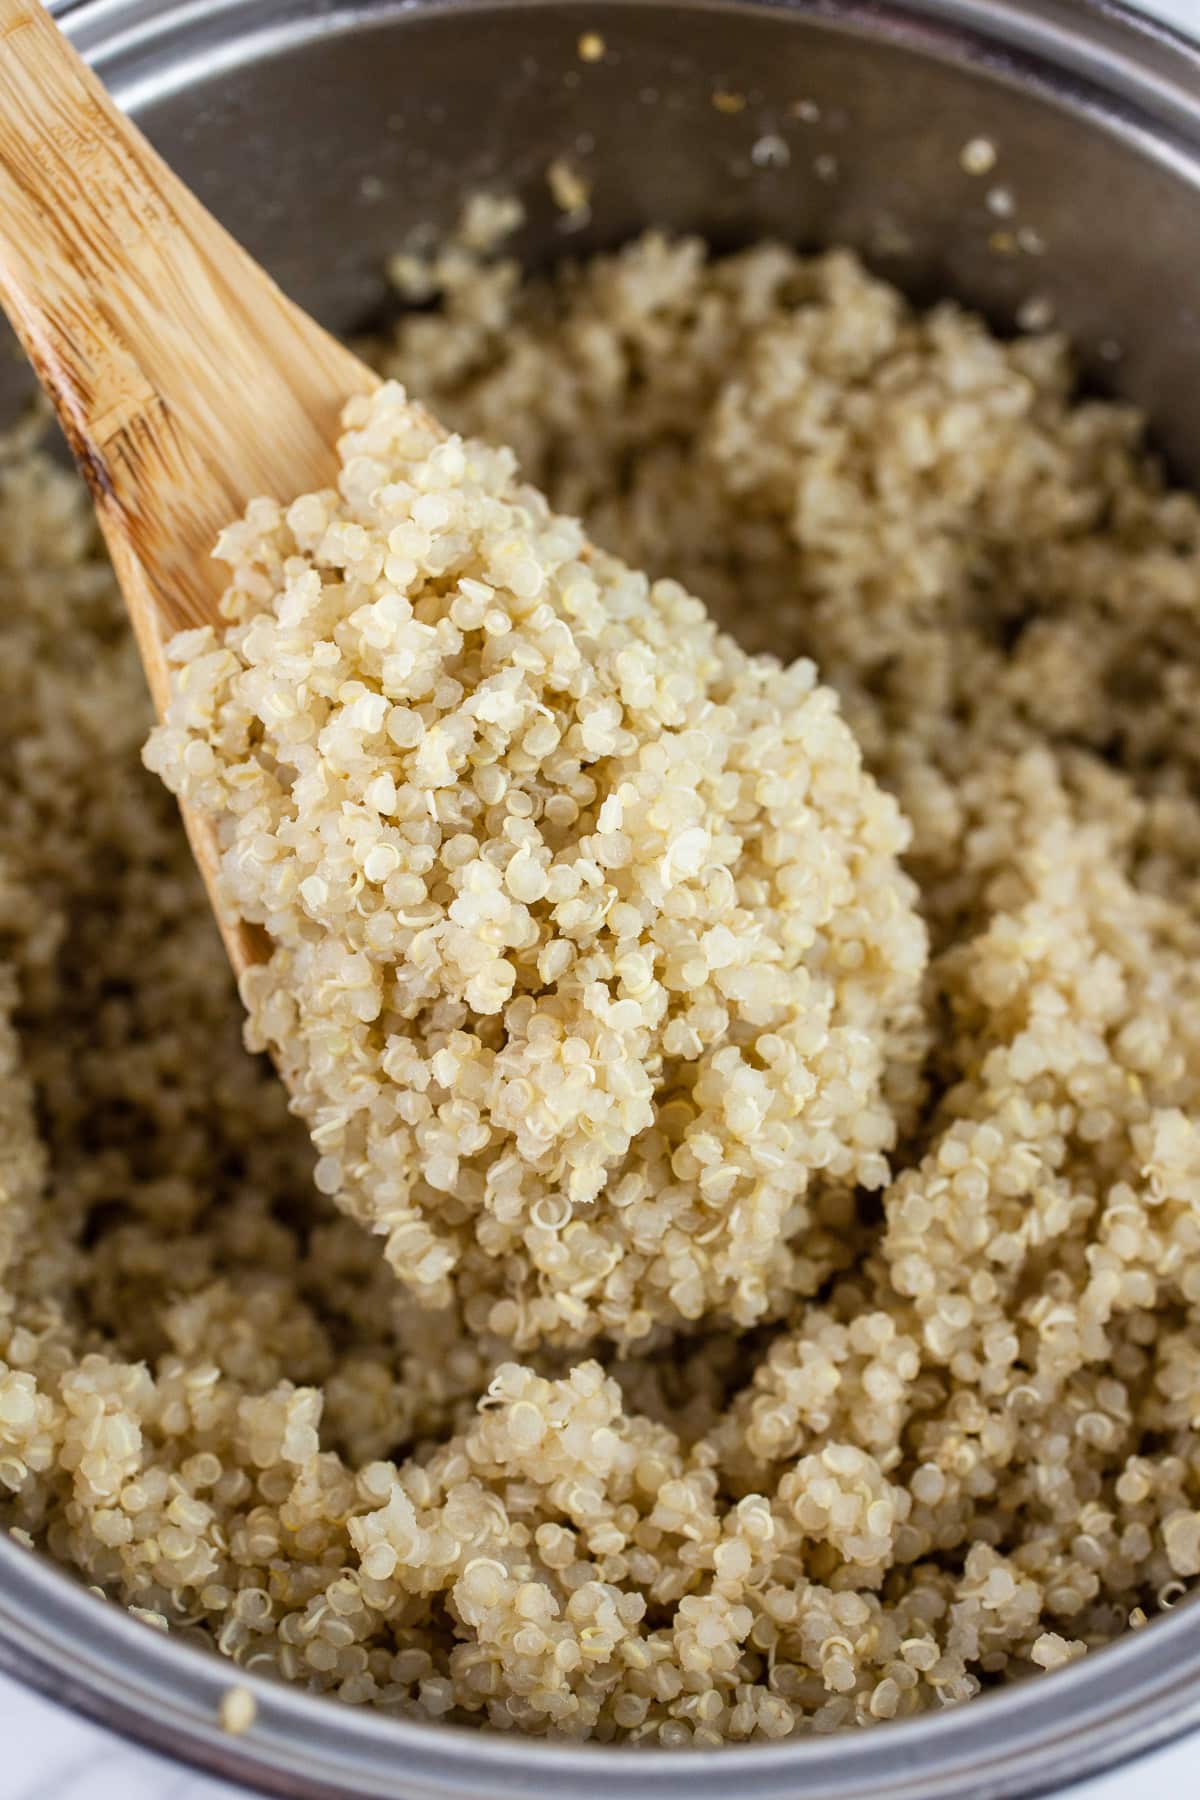 Cooked quinoa lifted with wooden spoon from sauce pan.